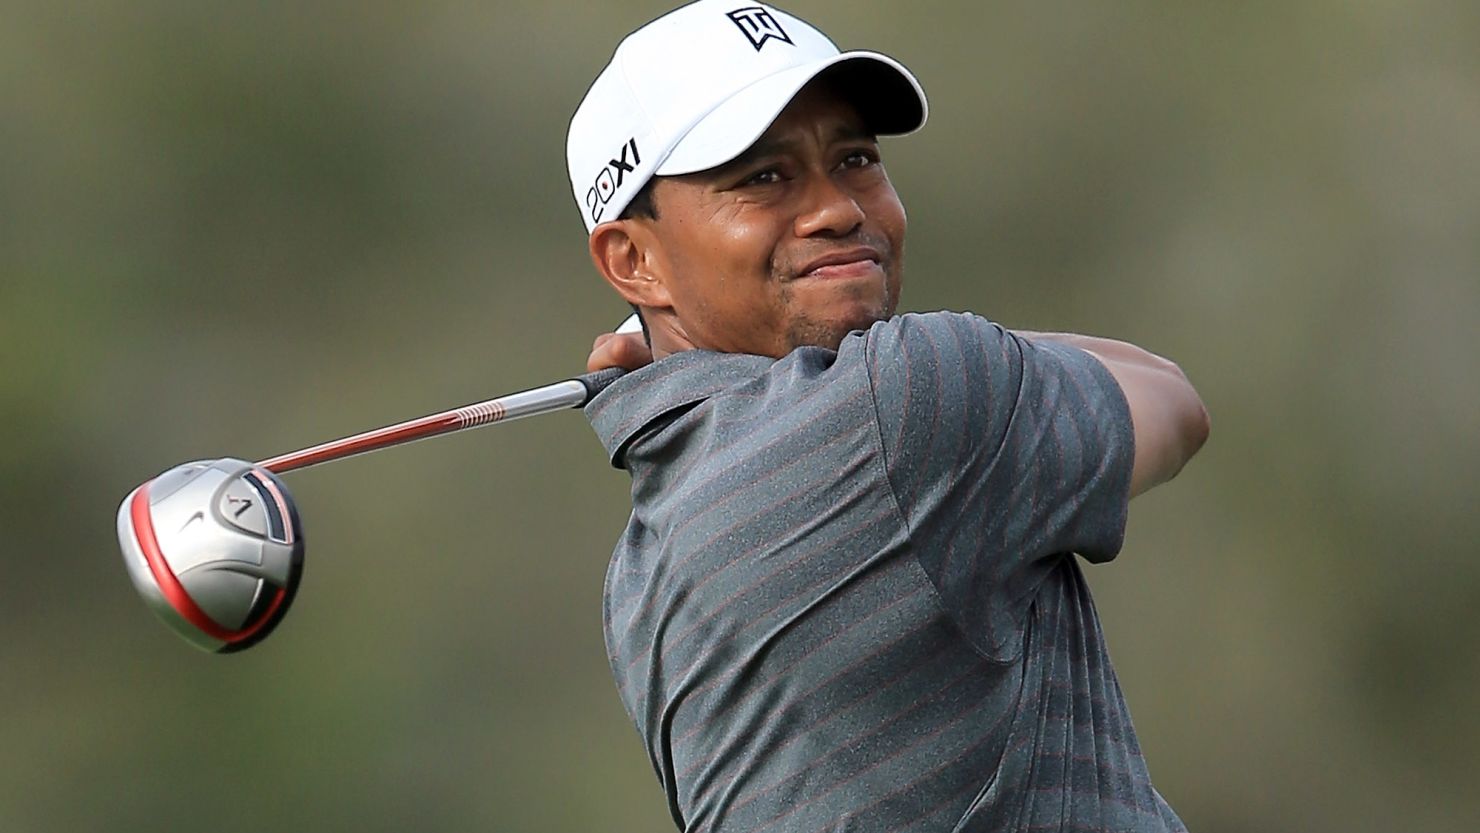 Tiger Woods struck the ball impressively from tee to green during his third round in Florida.